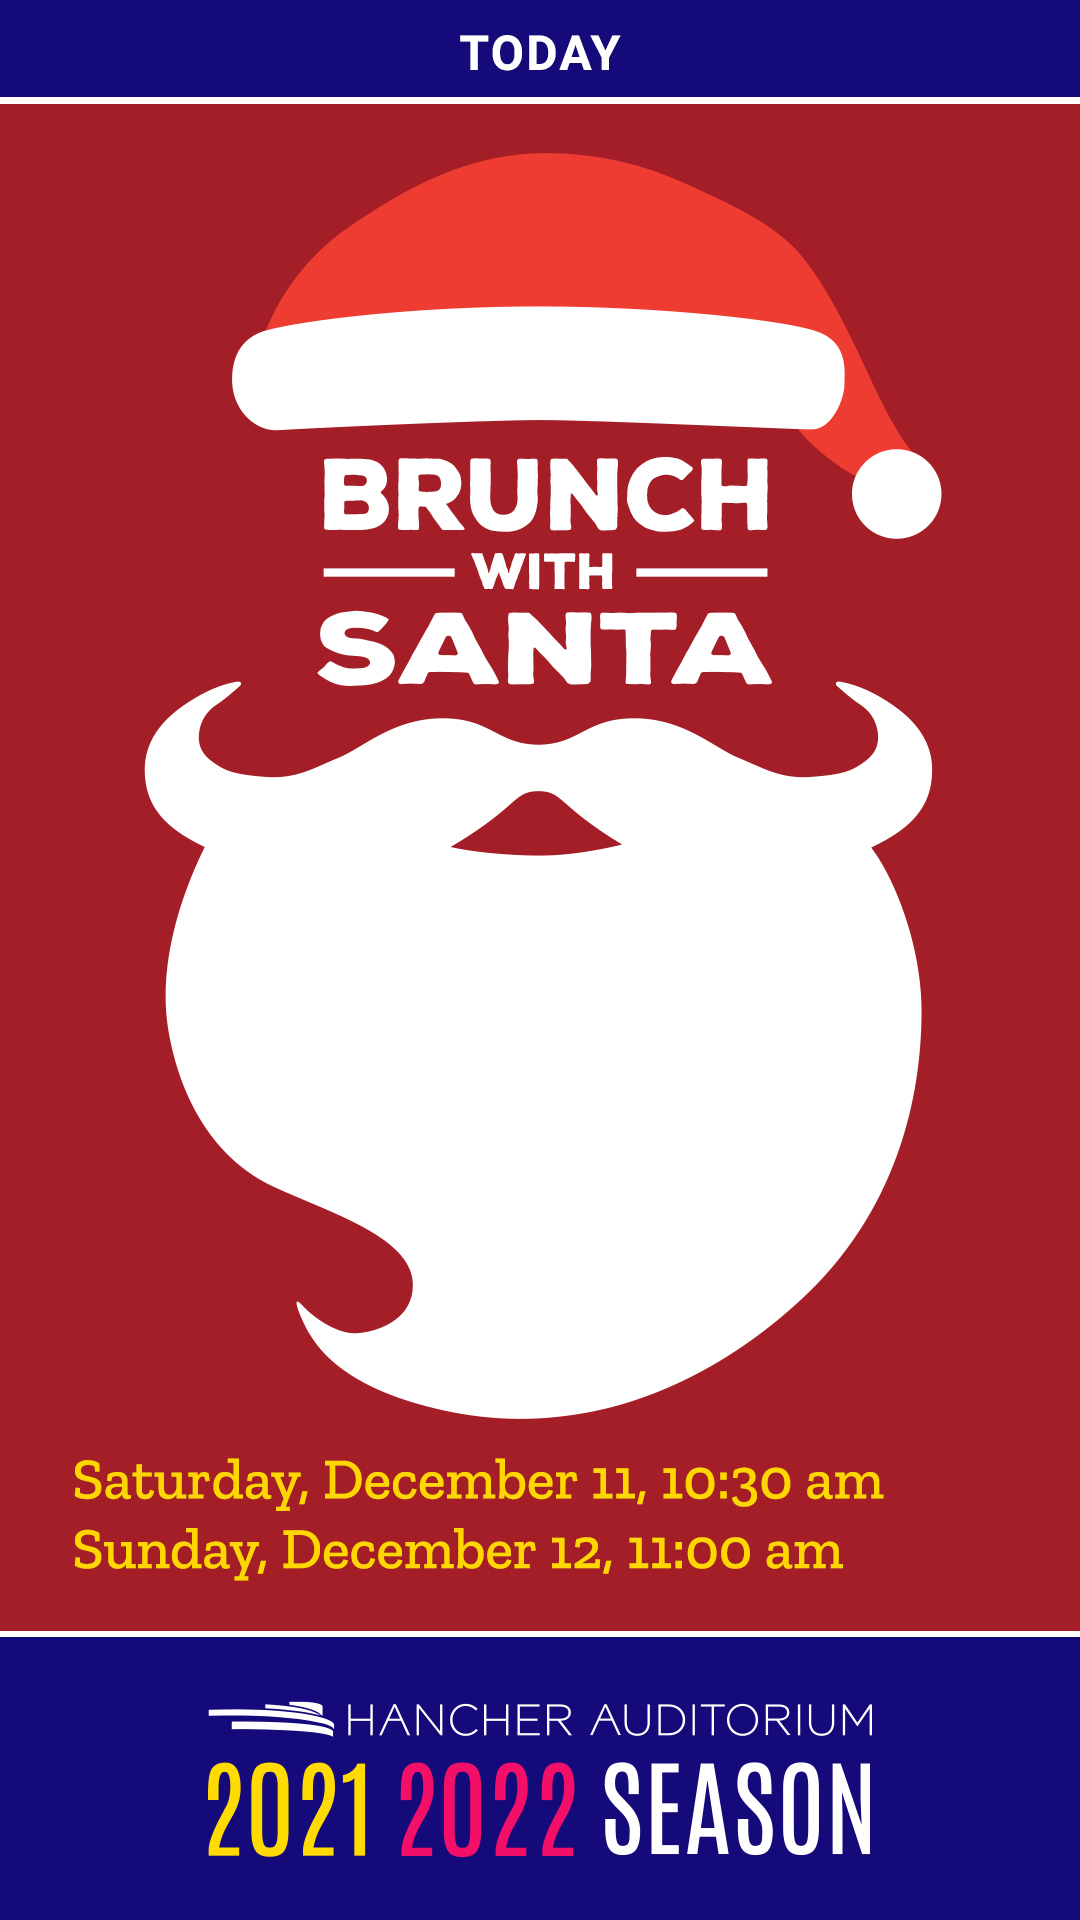 Brunch with Santa - Today